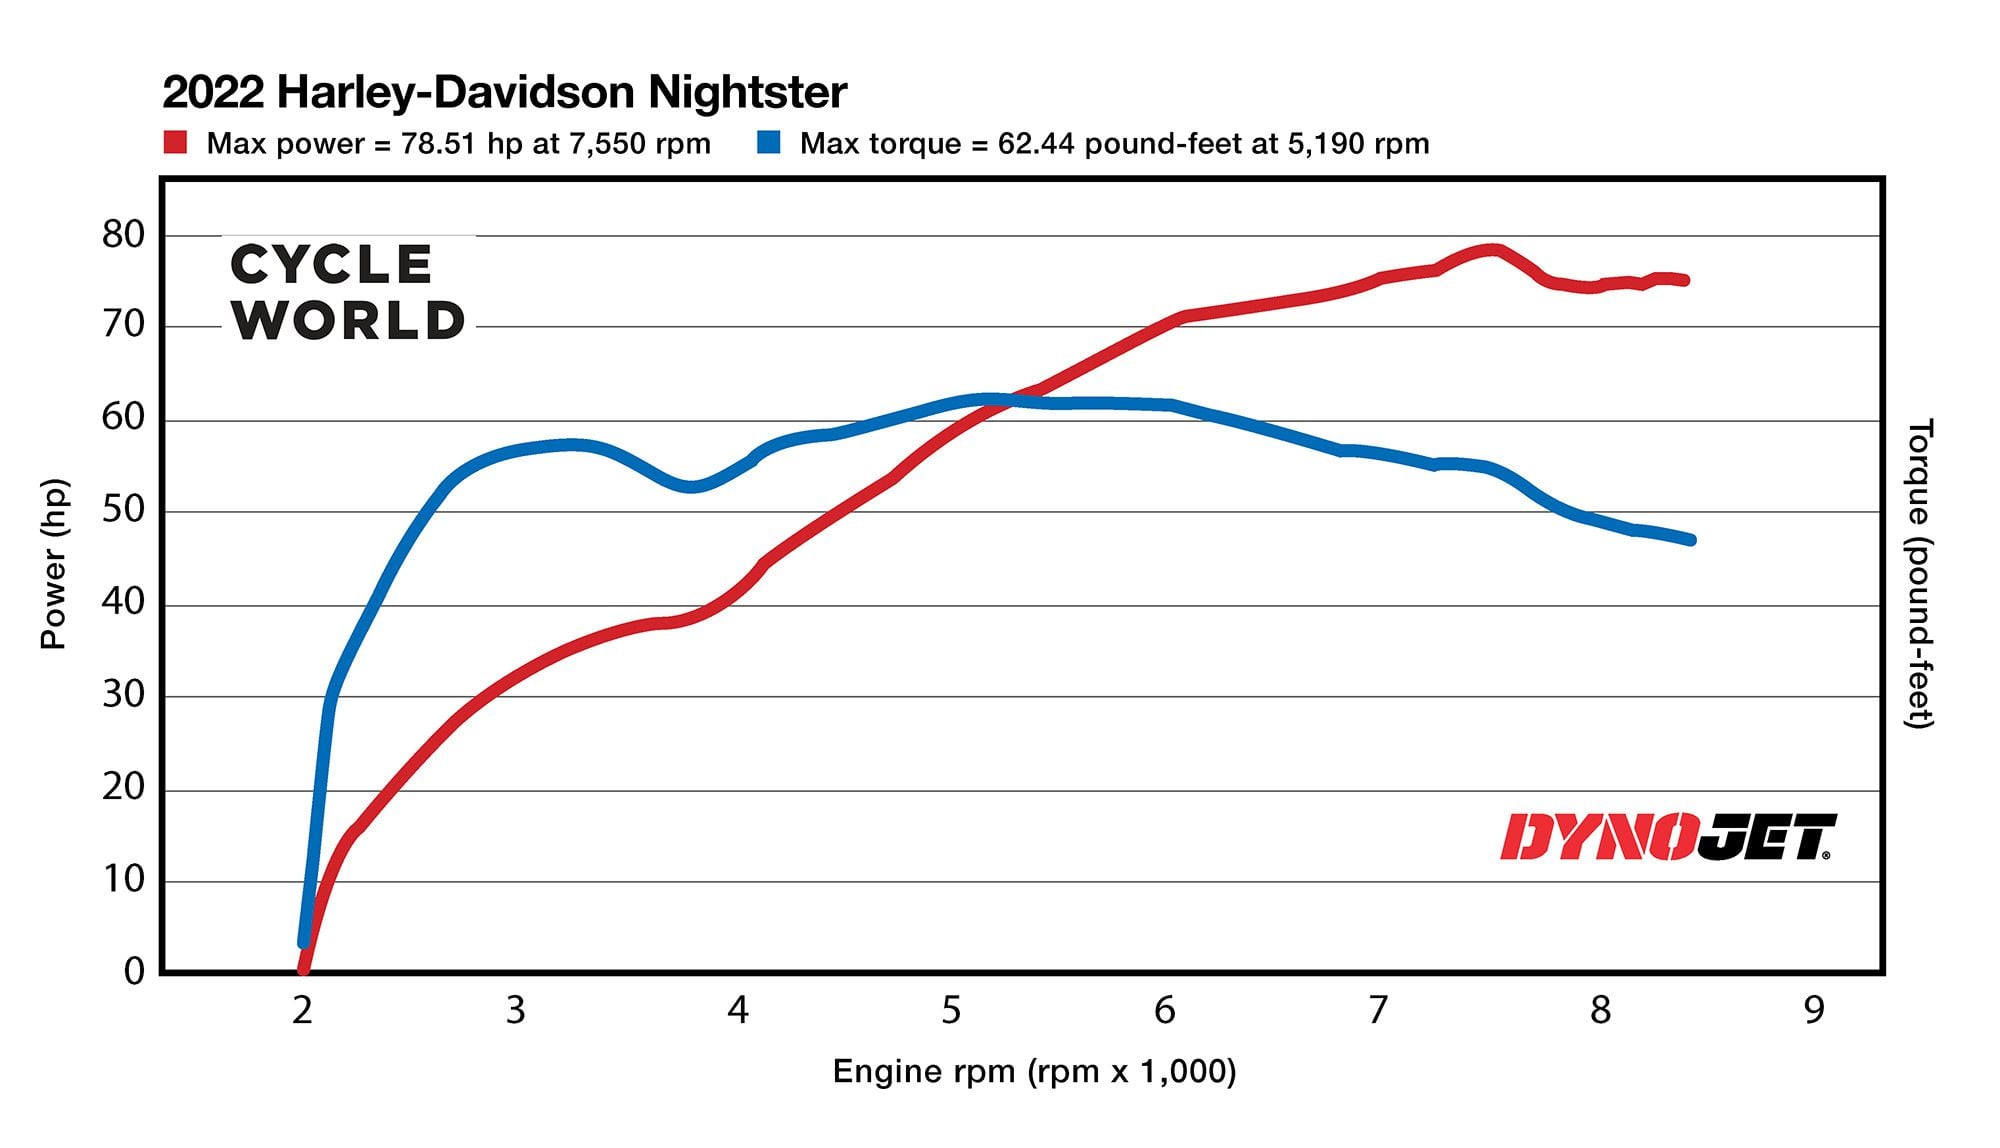 How Much Power Does the 2022 Harley-Davidson Nightster Make?